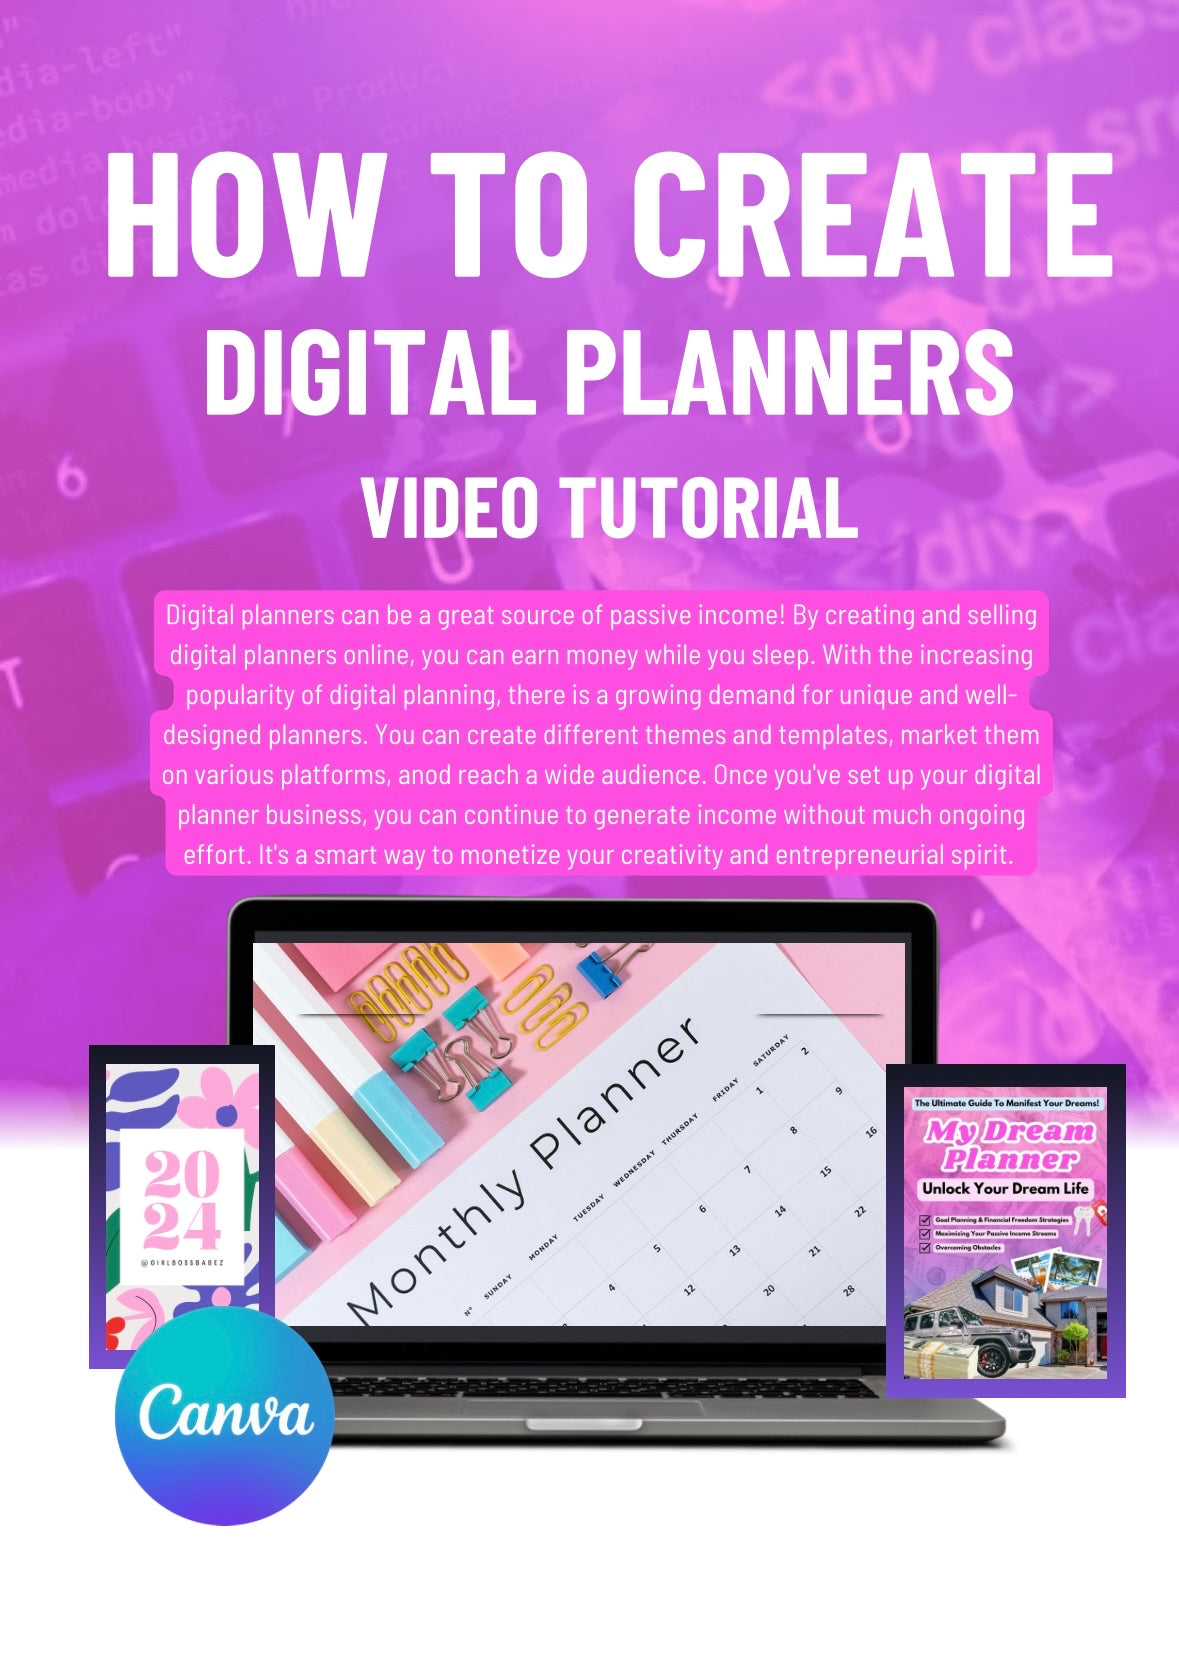 Canva Digital Planner How To Guide Tutorial